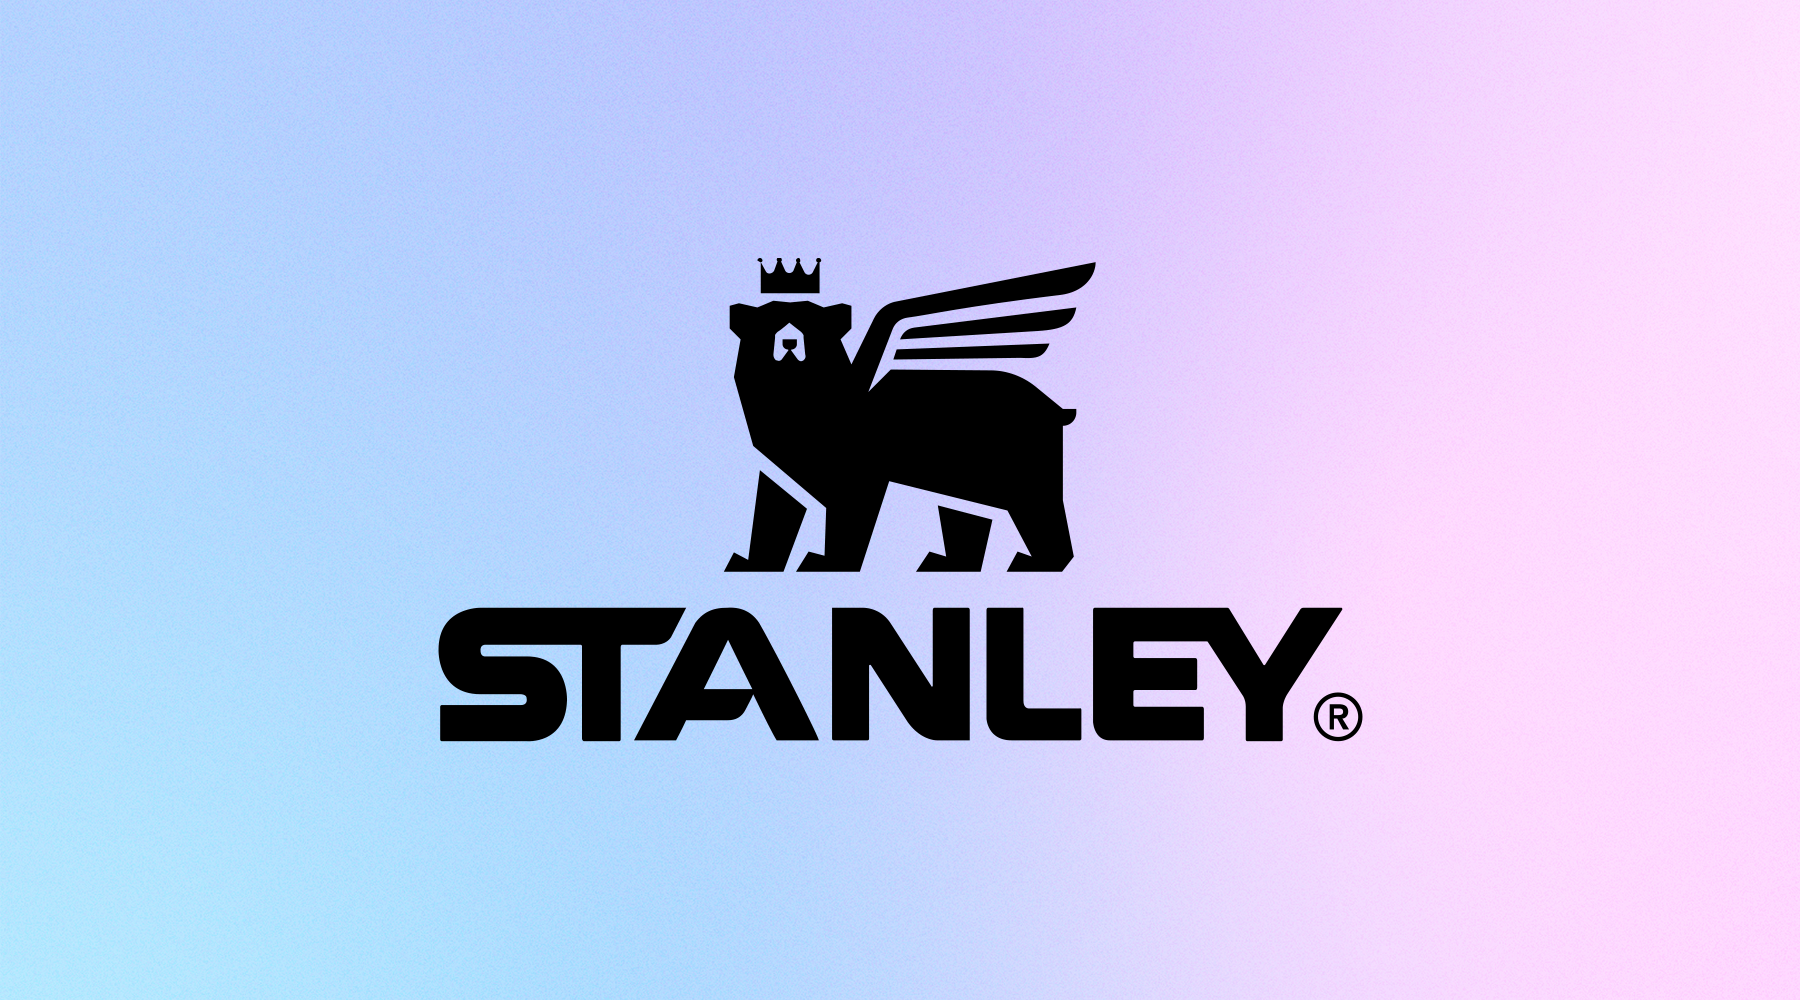 BRAND IN FOCUS: Stanley is putting competitors on ice